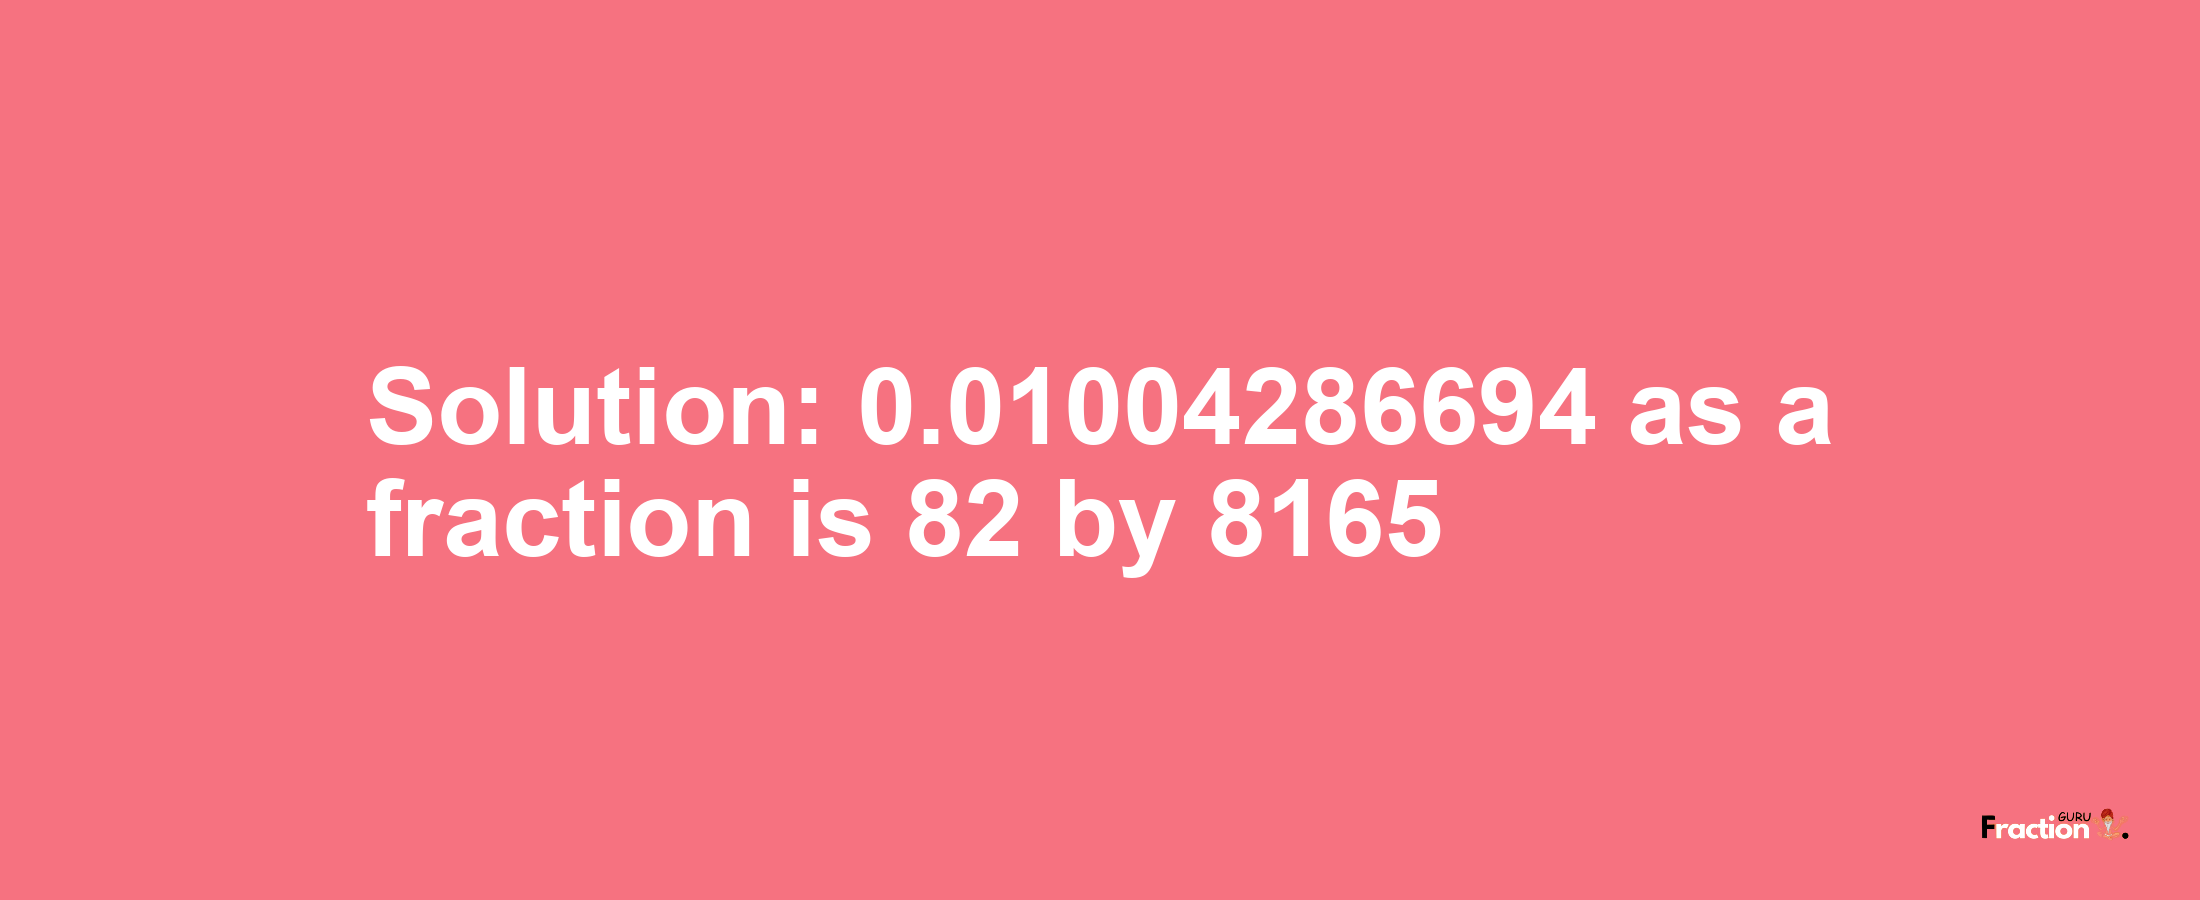 Solution:0.01004286694 as a fraction is 82/8165